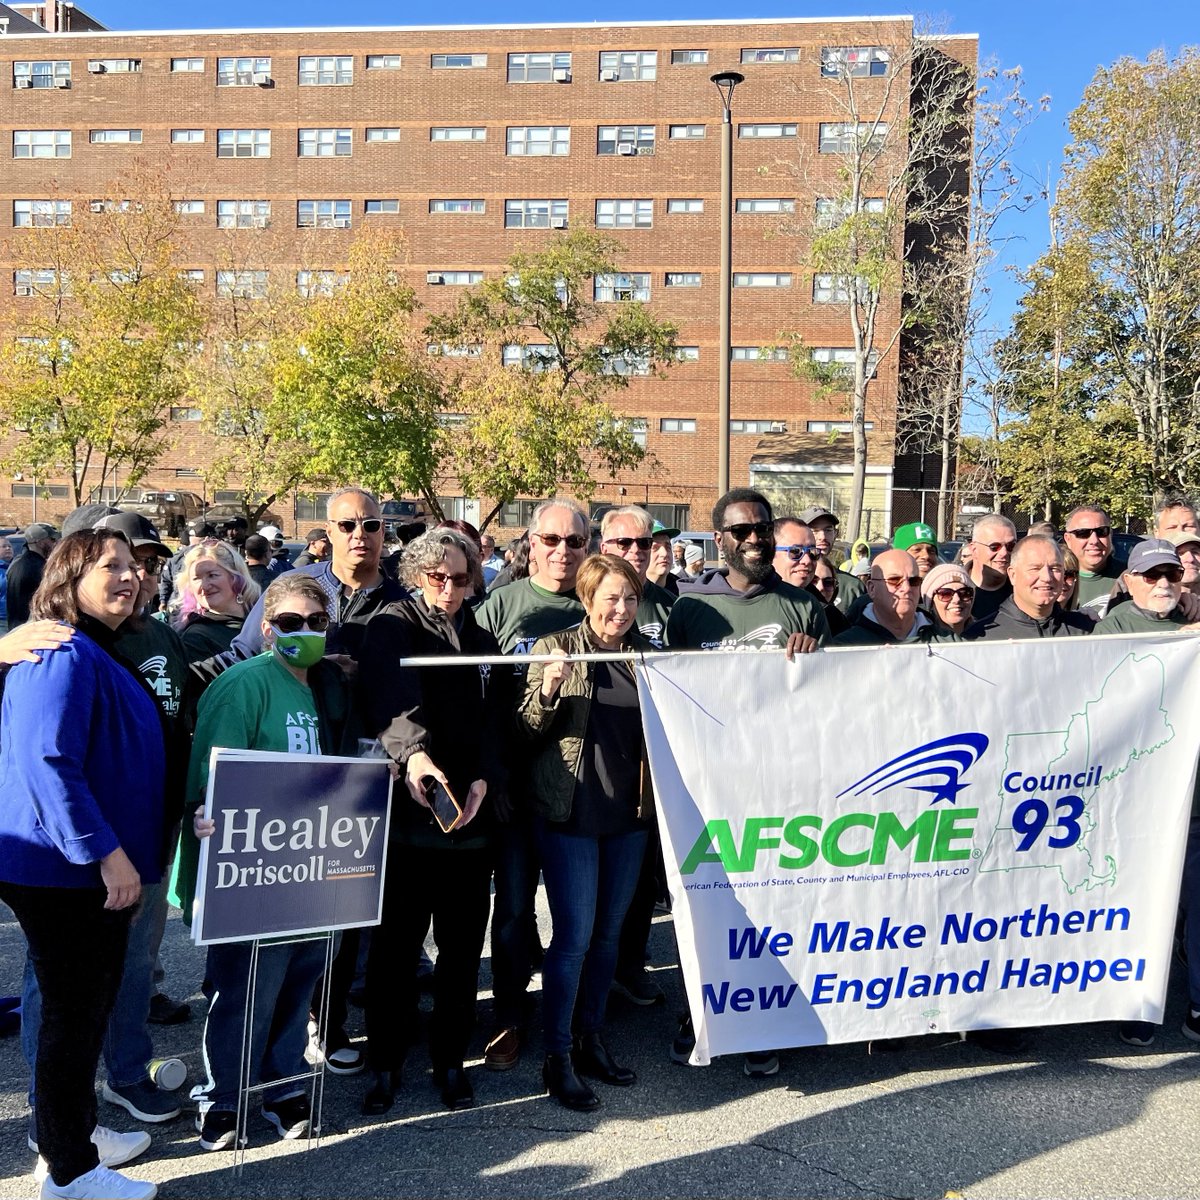 It’s the first day of early voting in Massachusetts, so I joined @massaflcio, @MayorDriscoll, and @DianaDiZoglio for an early vote rally and labor walk. Great to join so many volunteers and union members hitting the doors and making a difference. Unions get the job done.